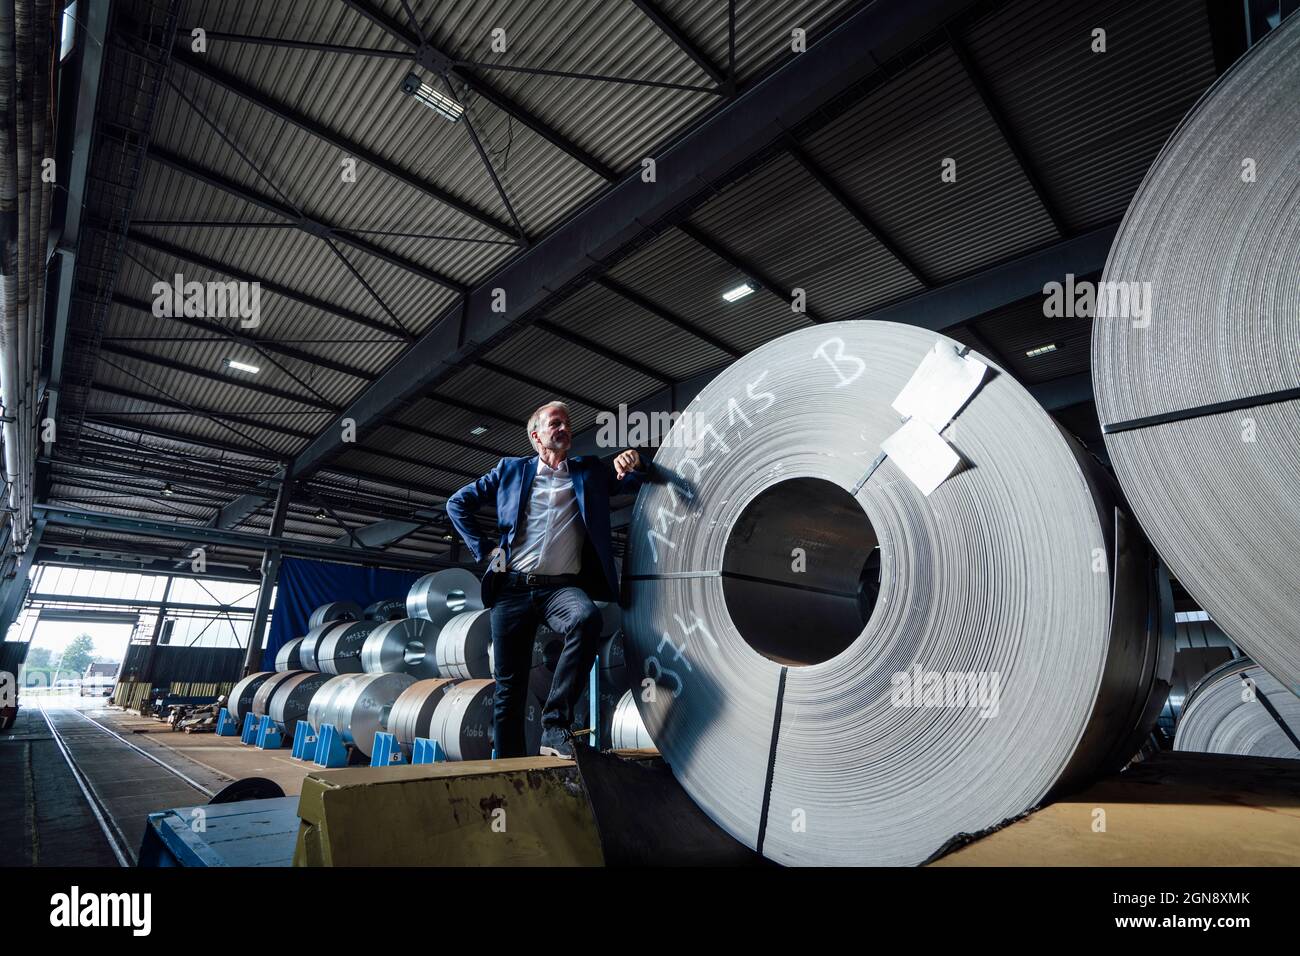 Businessman leaning on rolled up metal sheet at distribution warehouse Stock Photo